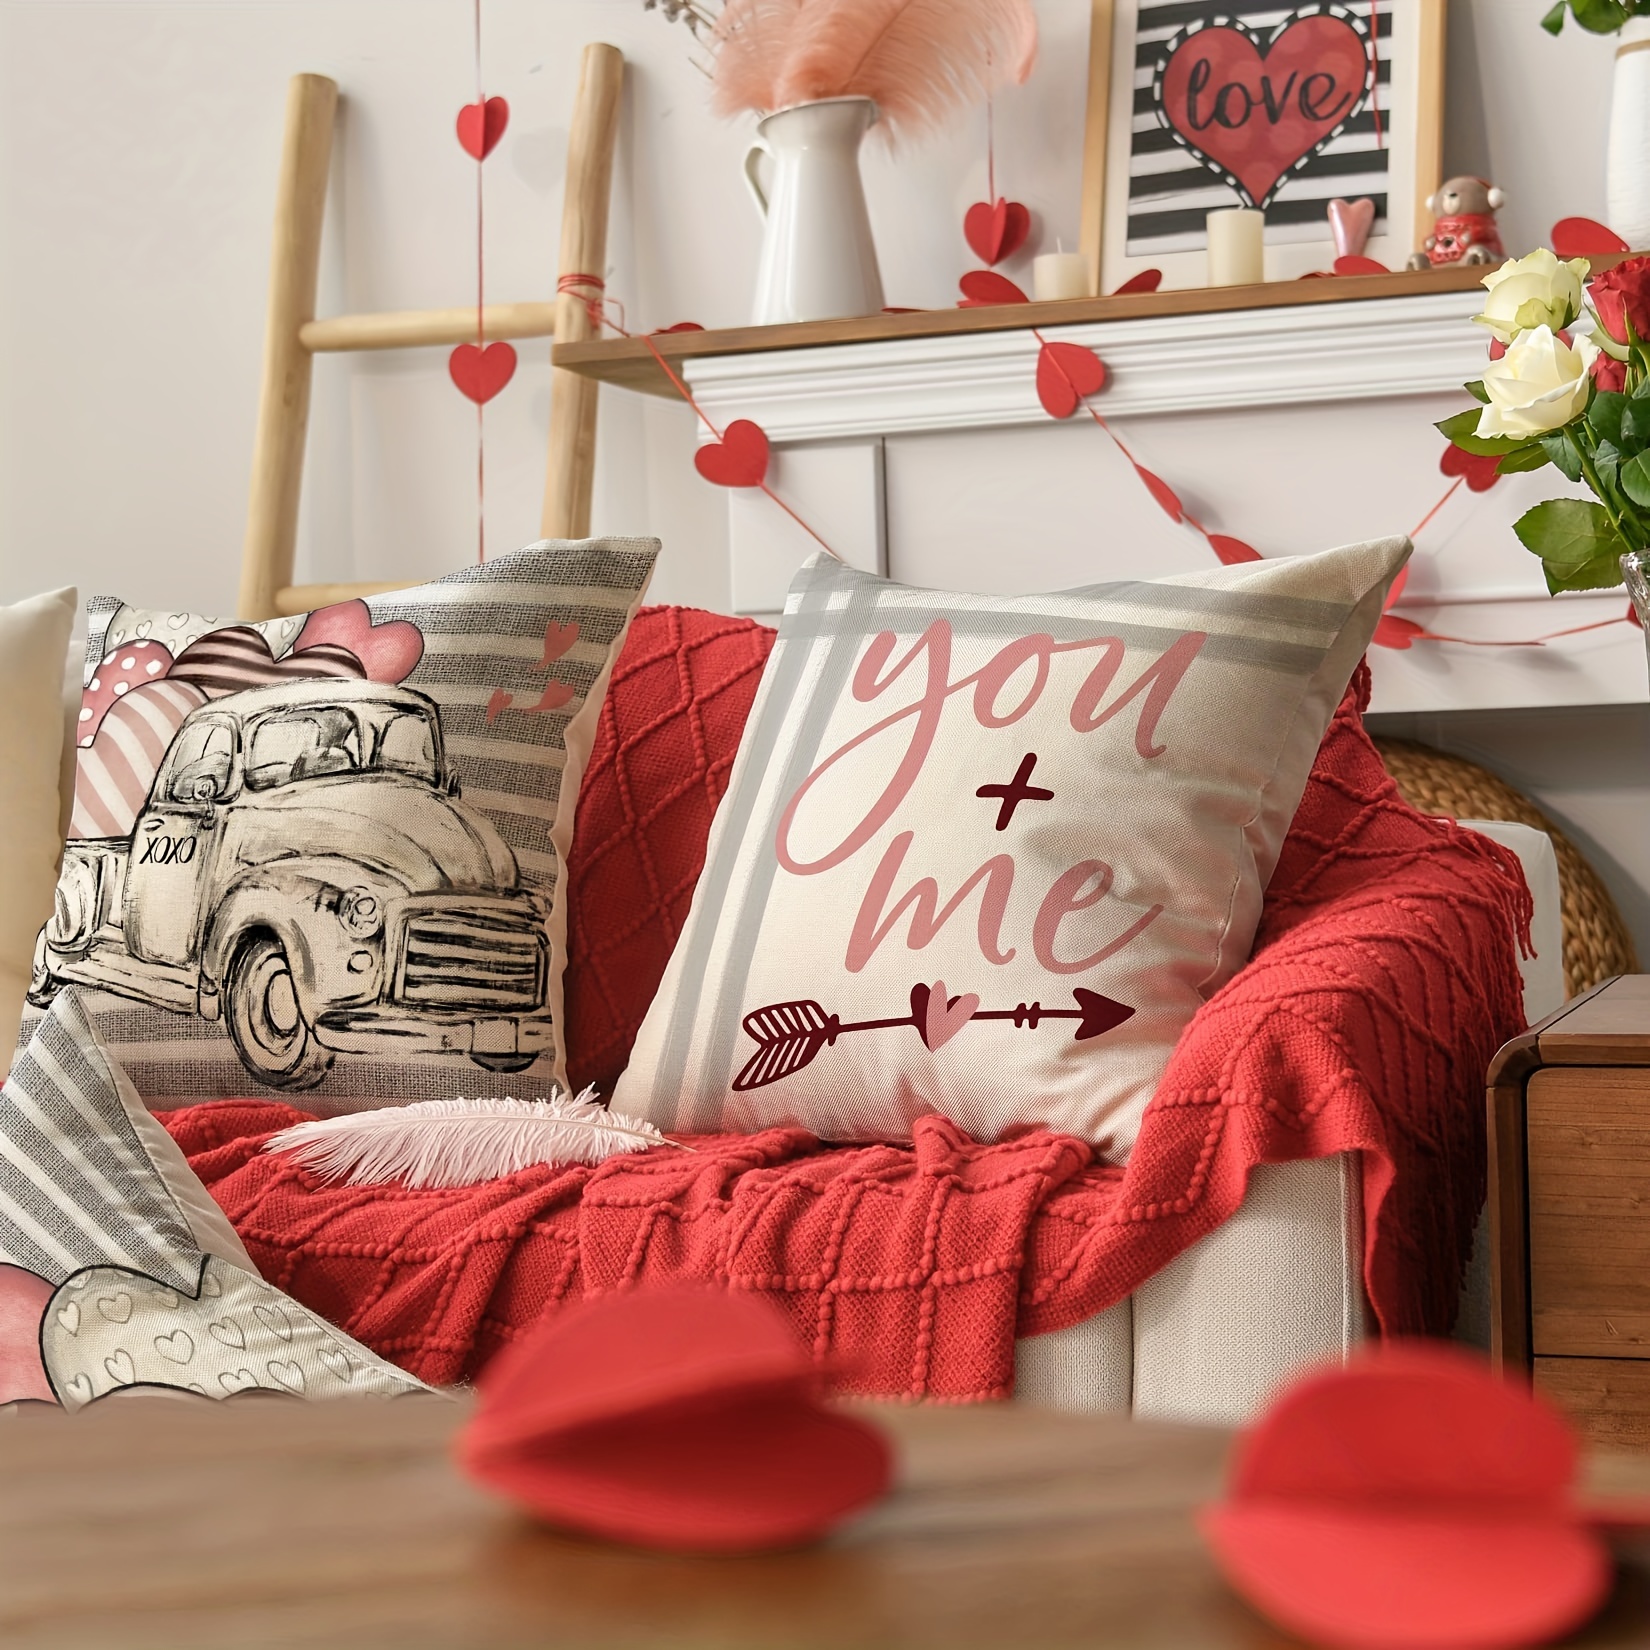  Valentine Pillow Covers 18×18 Inch Red Love Heart Valentine  Holiday Cushion Pillow Case Decorative Throw Cushion Cases for Sofa Couch  Valentine Farmhouse Living Room Deal : Home & Kitchen